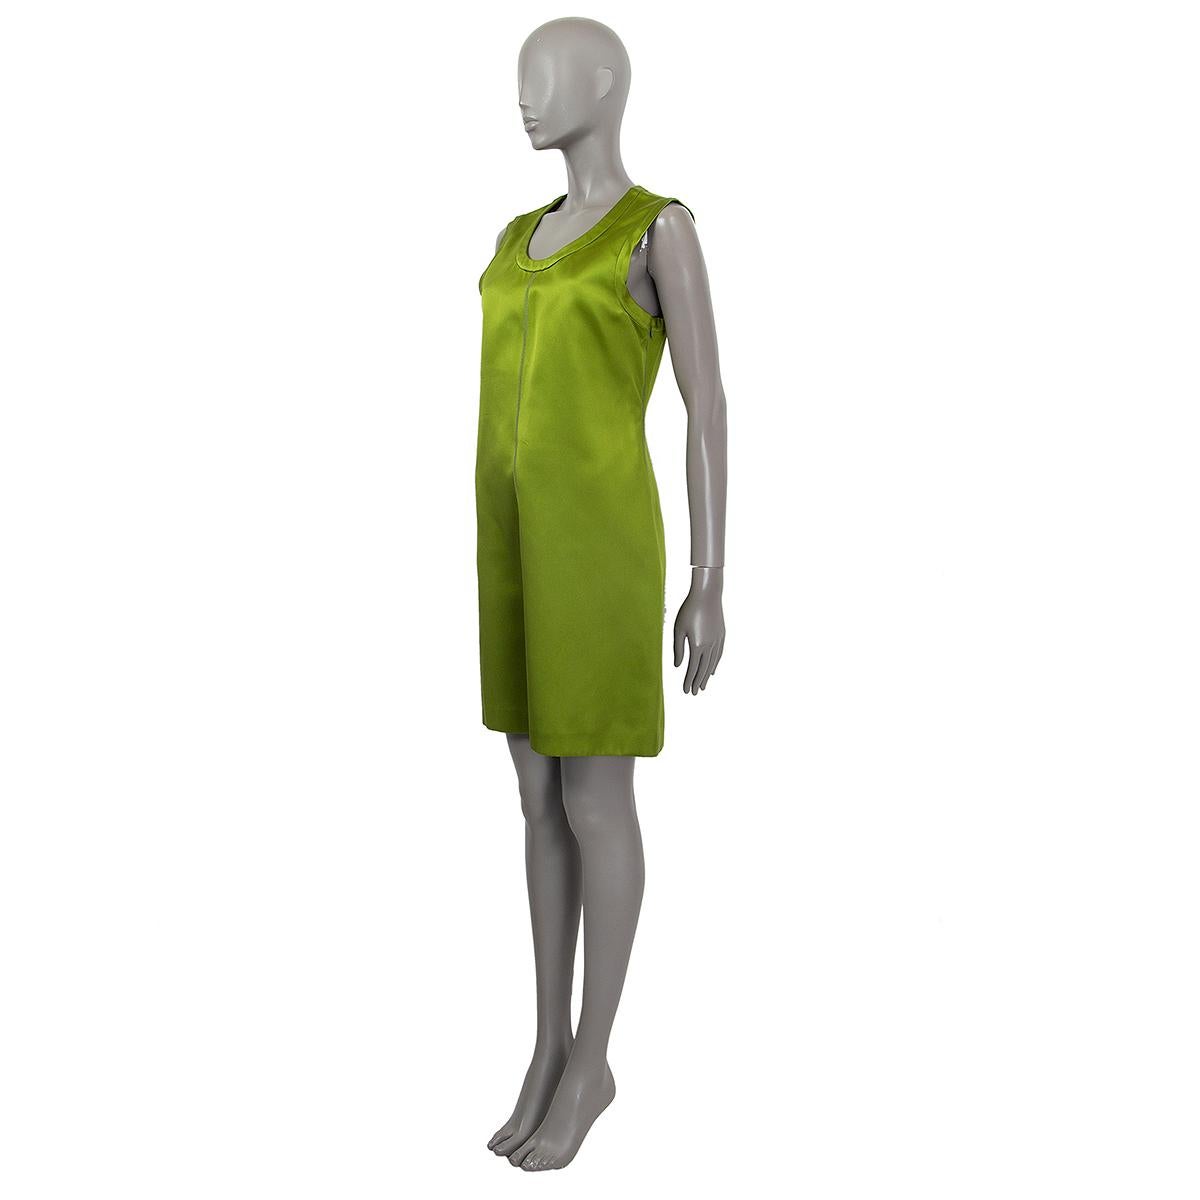 100% authentic Prada sleeveless satin mini dress in chartreuse green silk (100%). Opens with a concealed zipper on the side. Unlined. Has been worn and is in  excellent condition.

Measurements
Tag Size	42
Size	M
Bust From	92cm (35.9in)
Waist